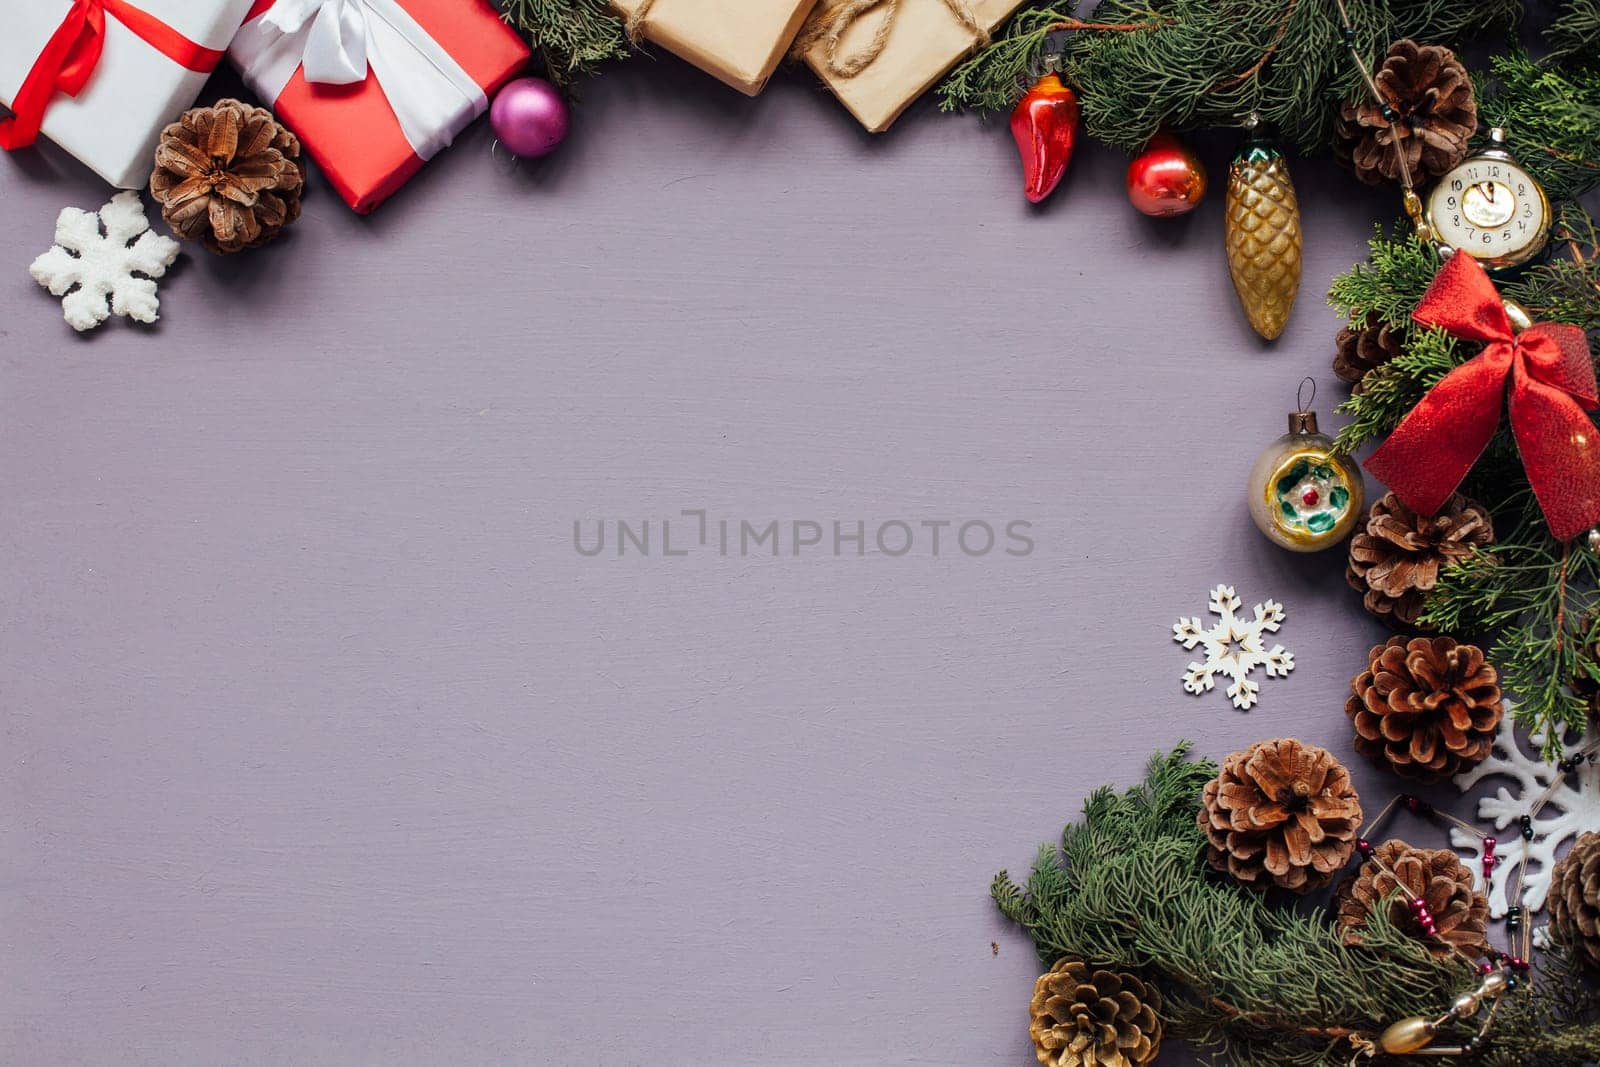 Christmas card decor for the new year on a purple background